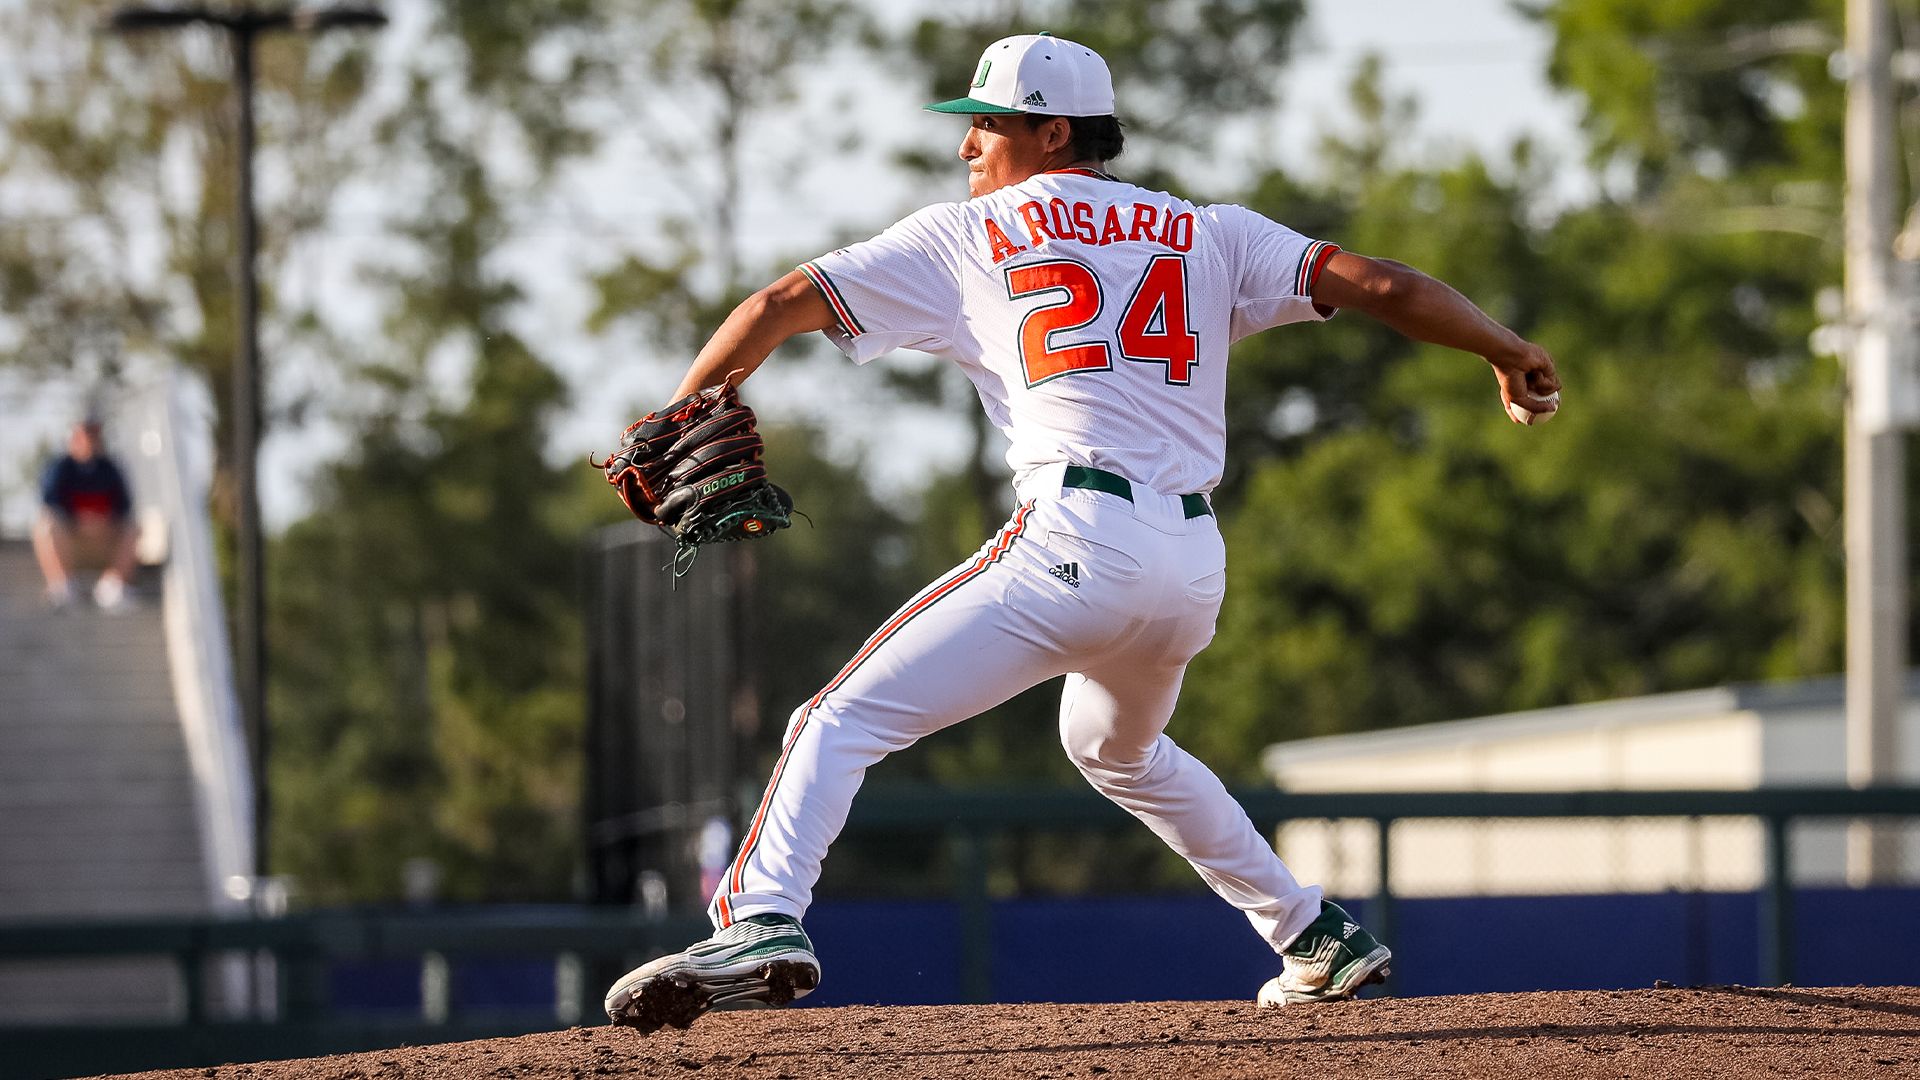 Canes Shut Out South Alabama in Regional Opener